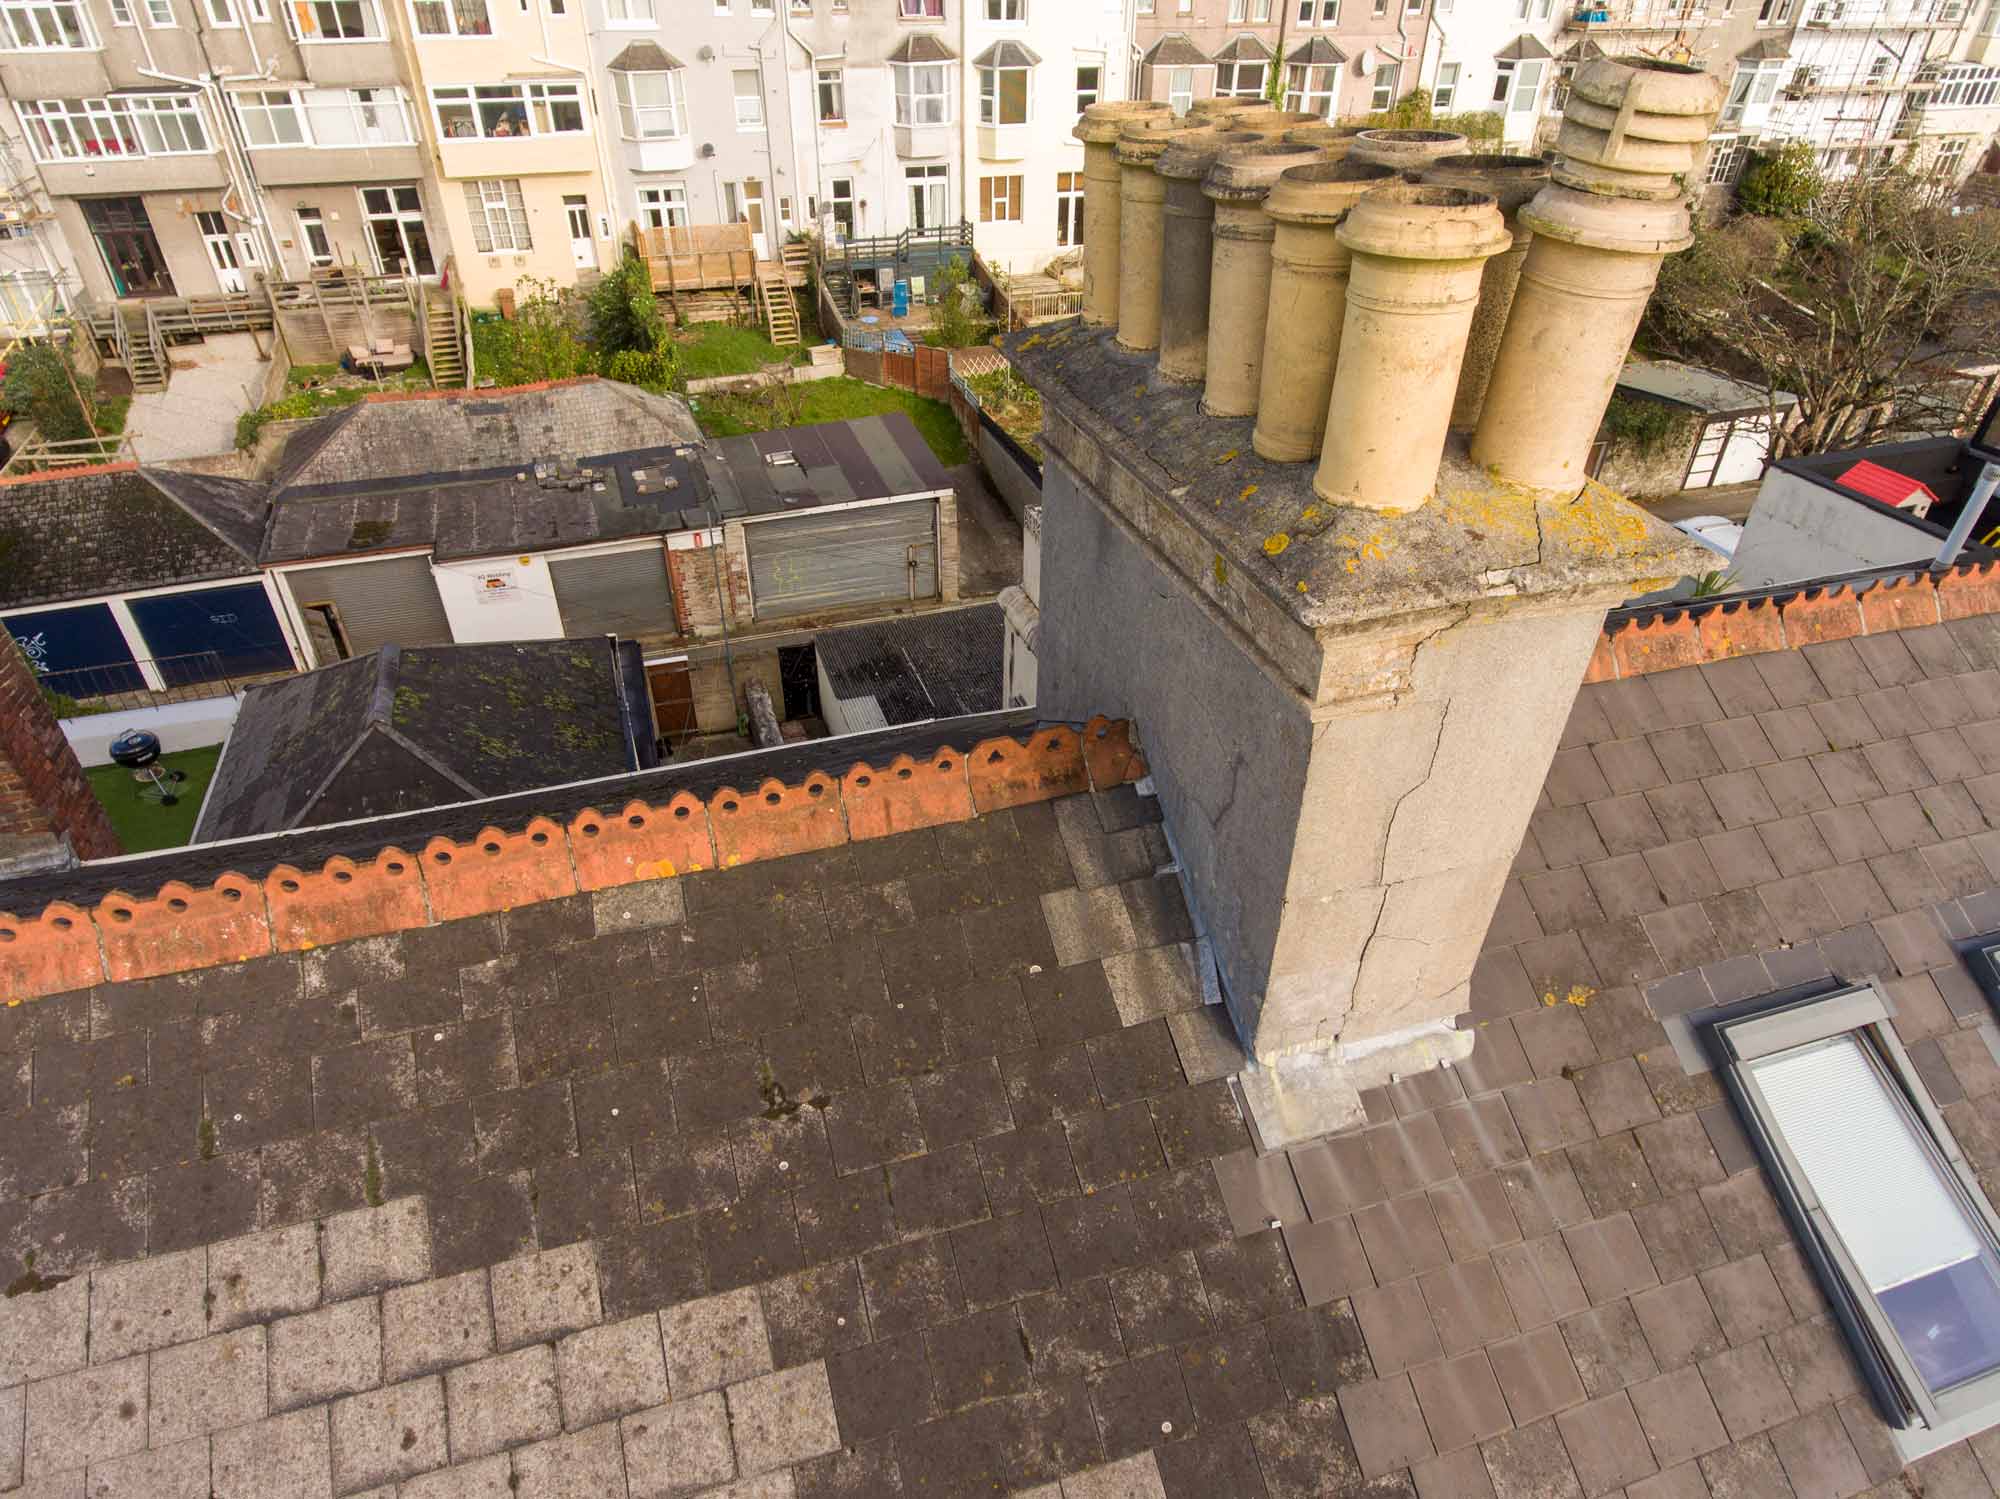 Professional drone roof inspections Cornwall Plymouth